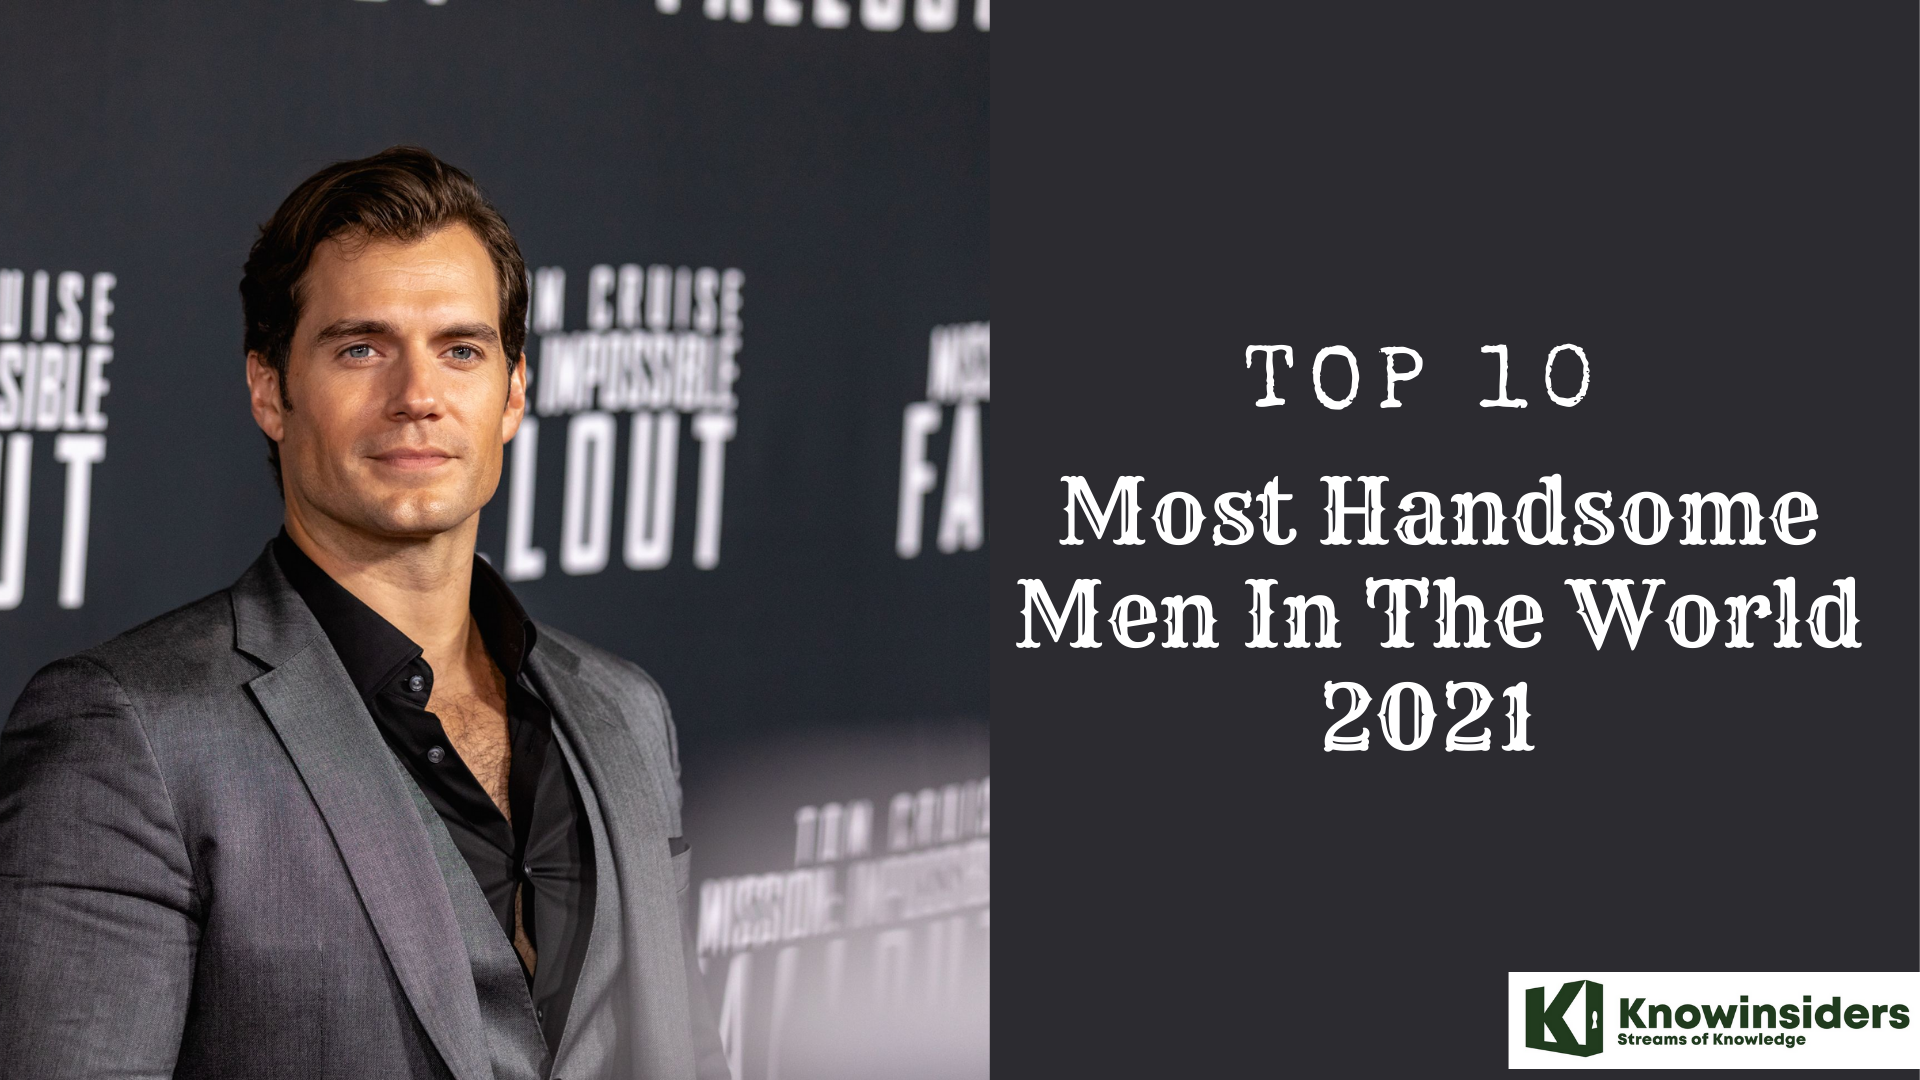 Top 10 Most Handsome Men In The World 2021/22